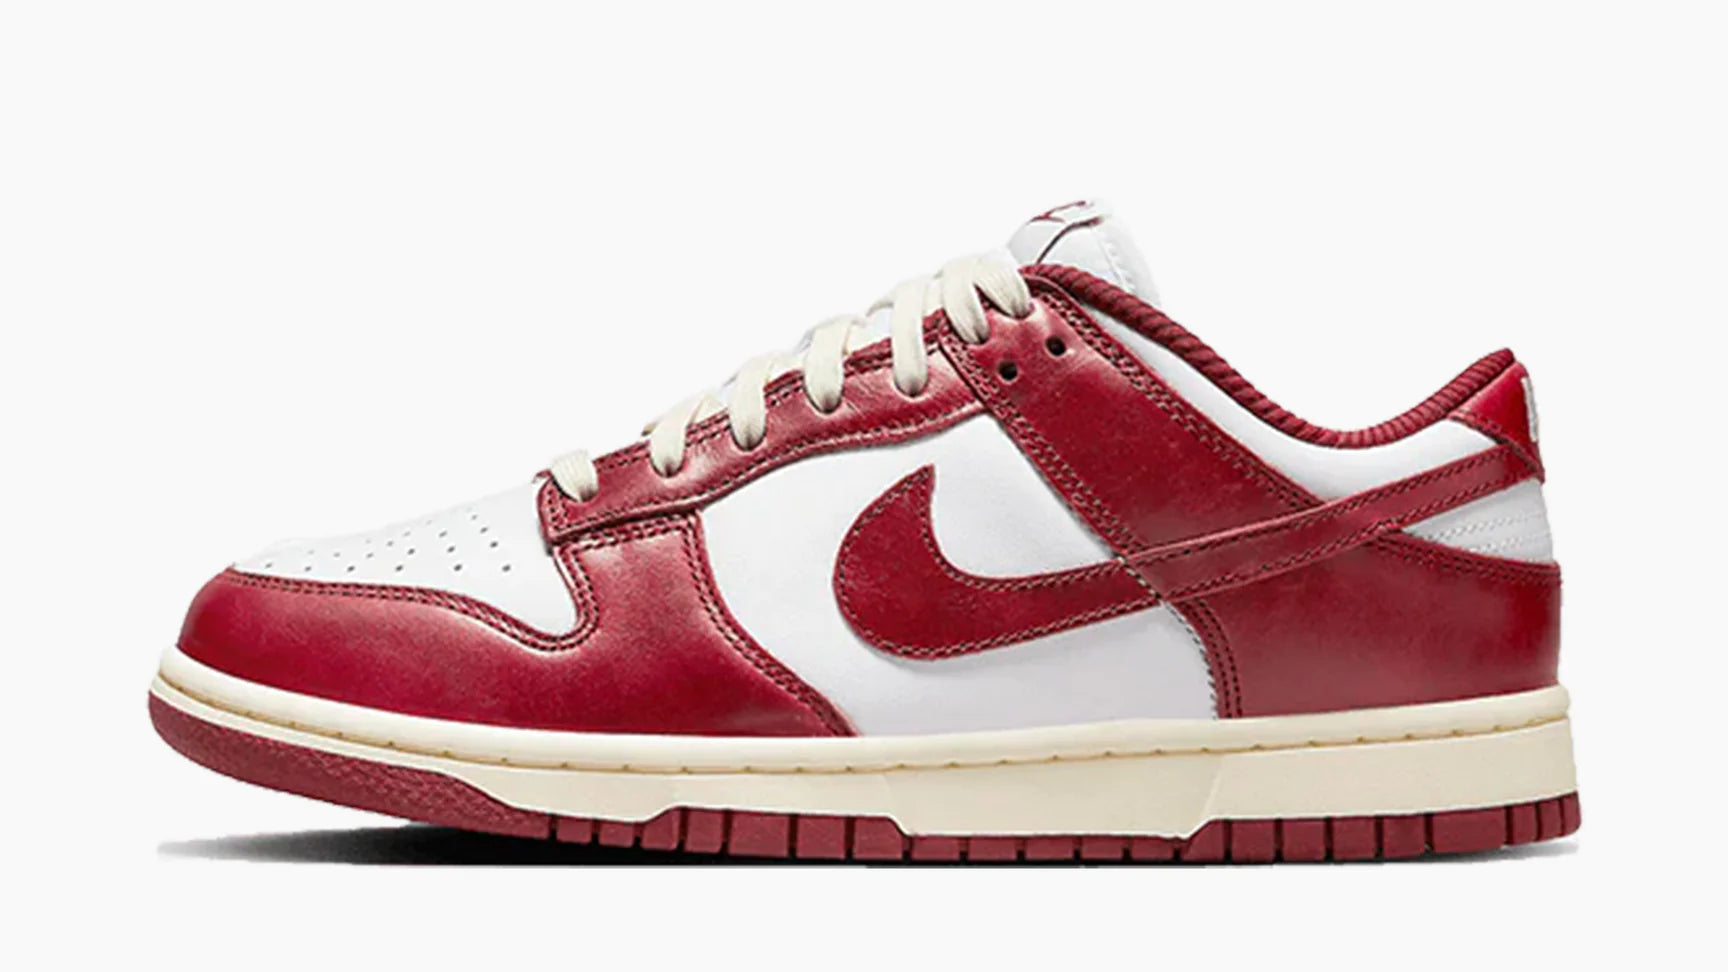 Nike Dunk Low PRM Team Red